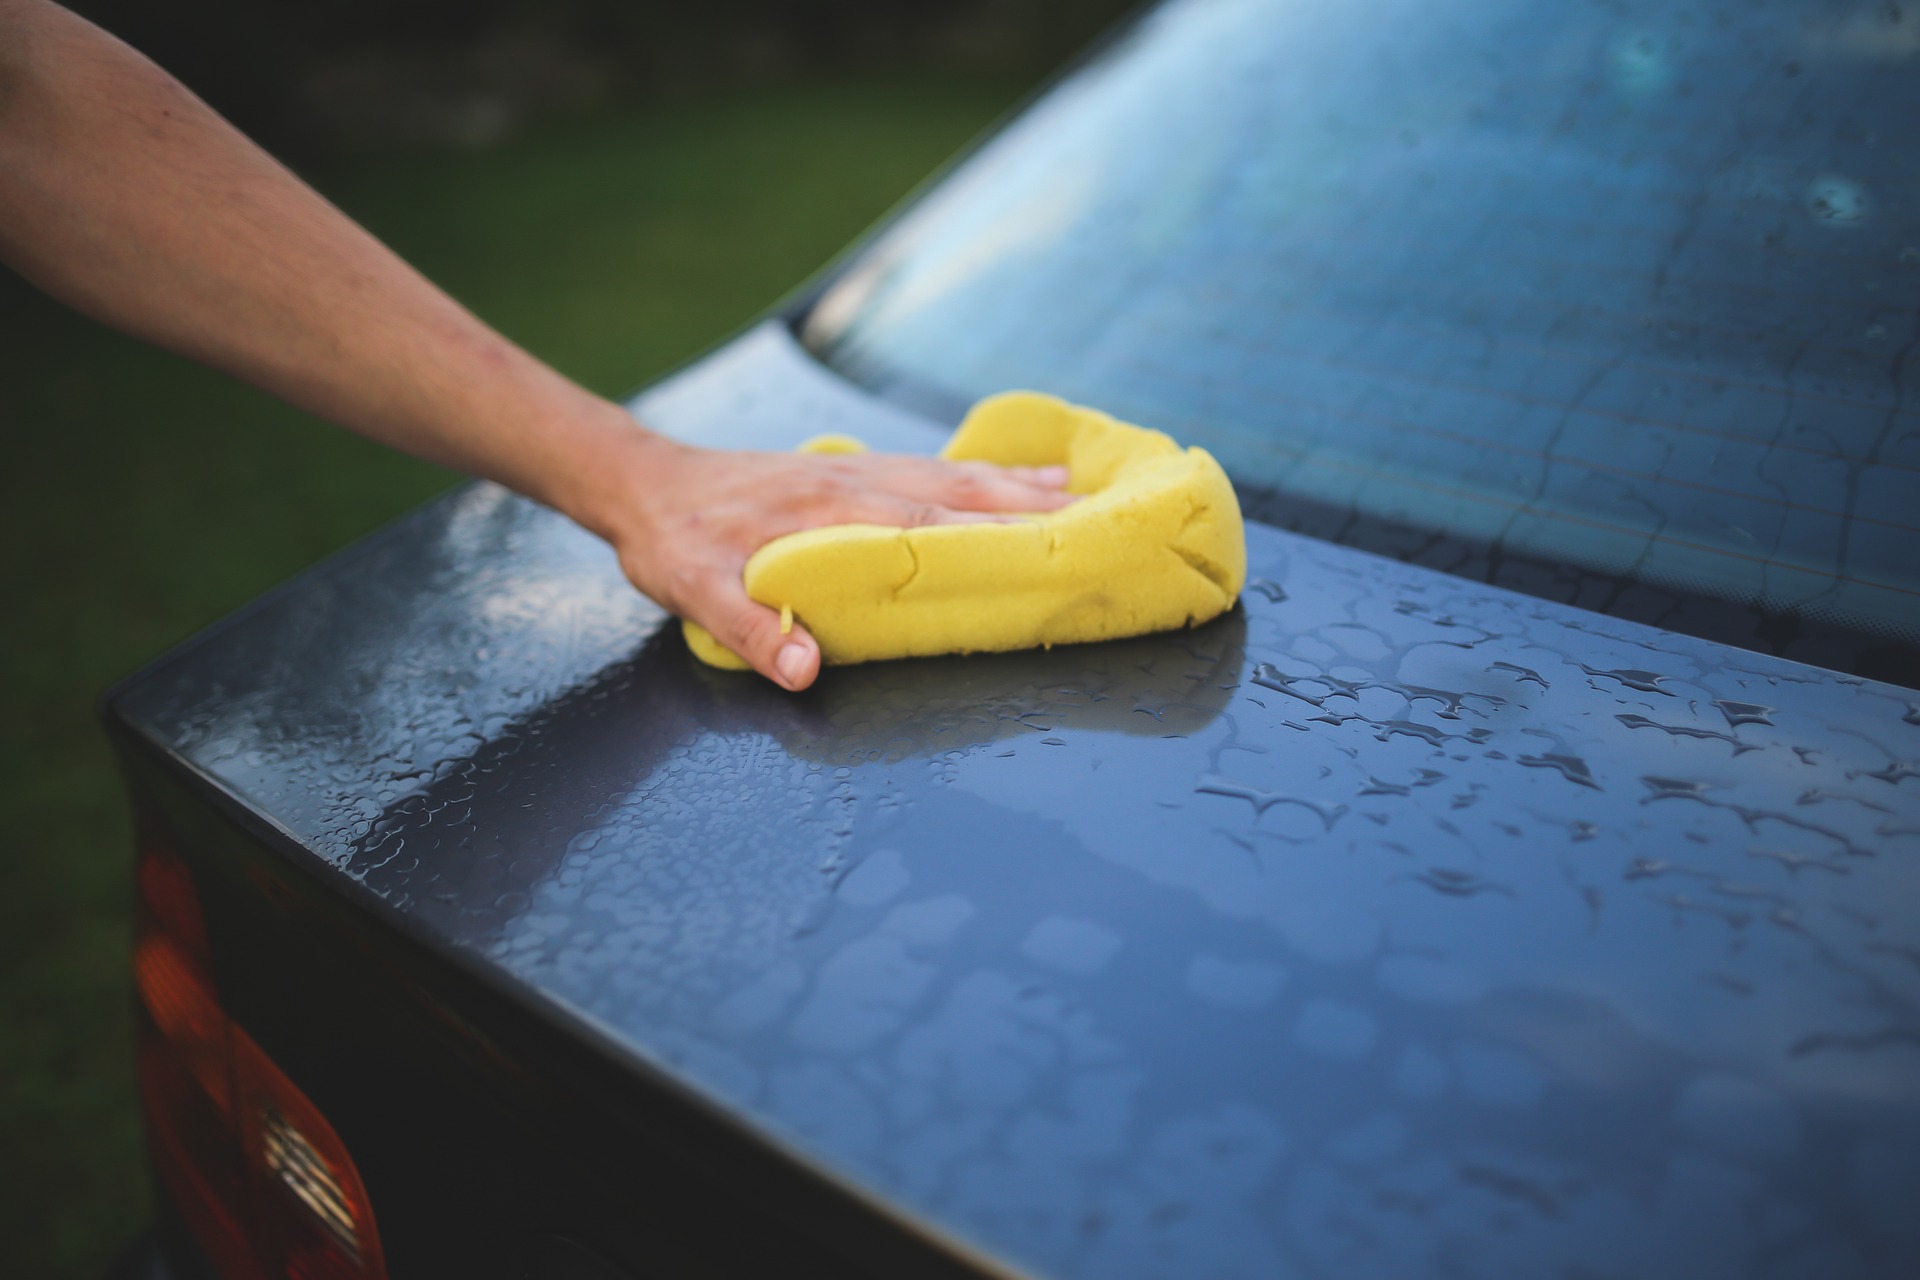 car washing tips, car cleaning, do it yourself car wash, diy car wash, how to wash a car, car wash steps, best car washing cloth, home car wash, best car drying towel, best way to wash a car, how to wash your car, how to properly wash a car, best way to dry a car, how to wash car at home, car wash towels, 